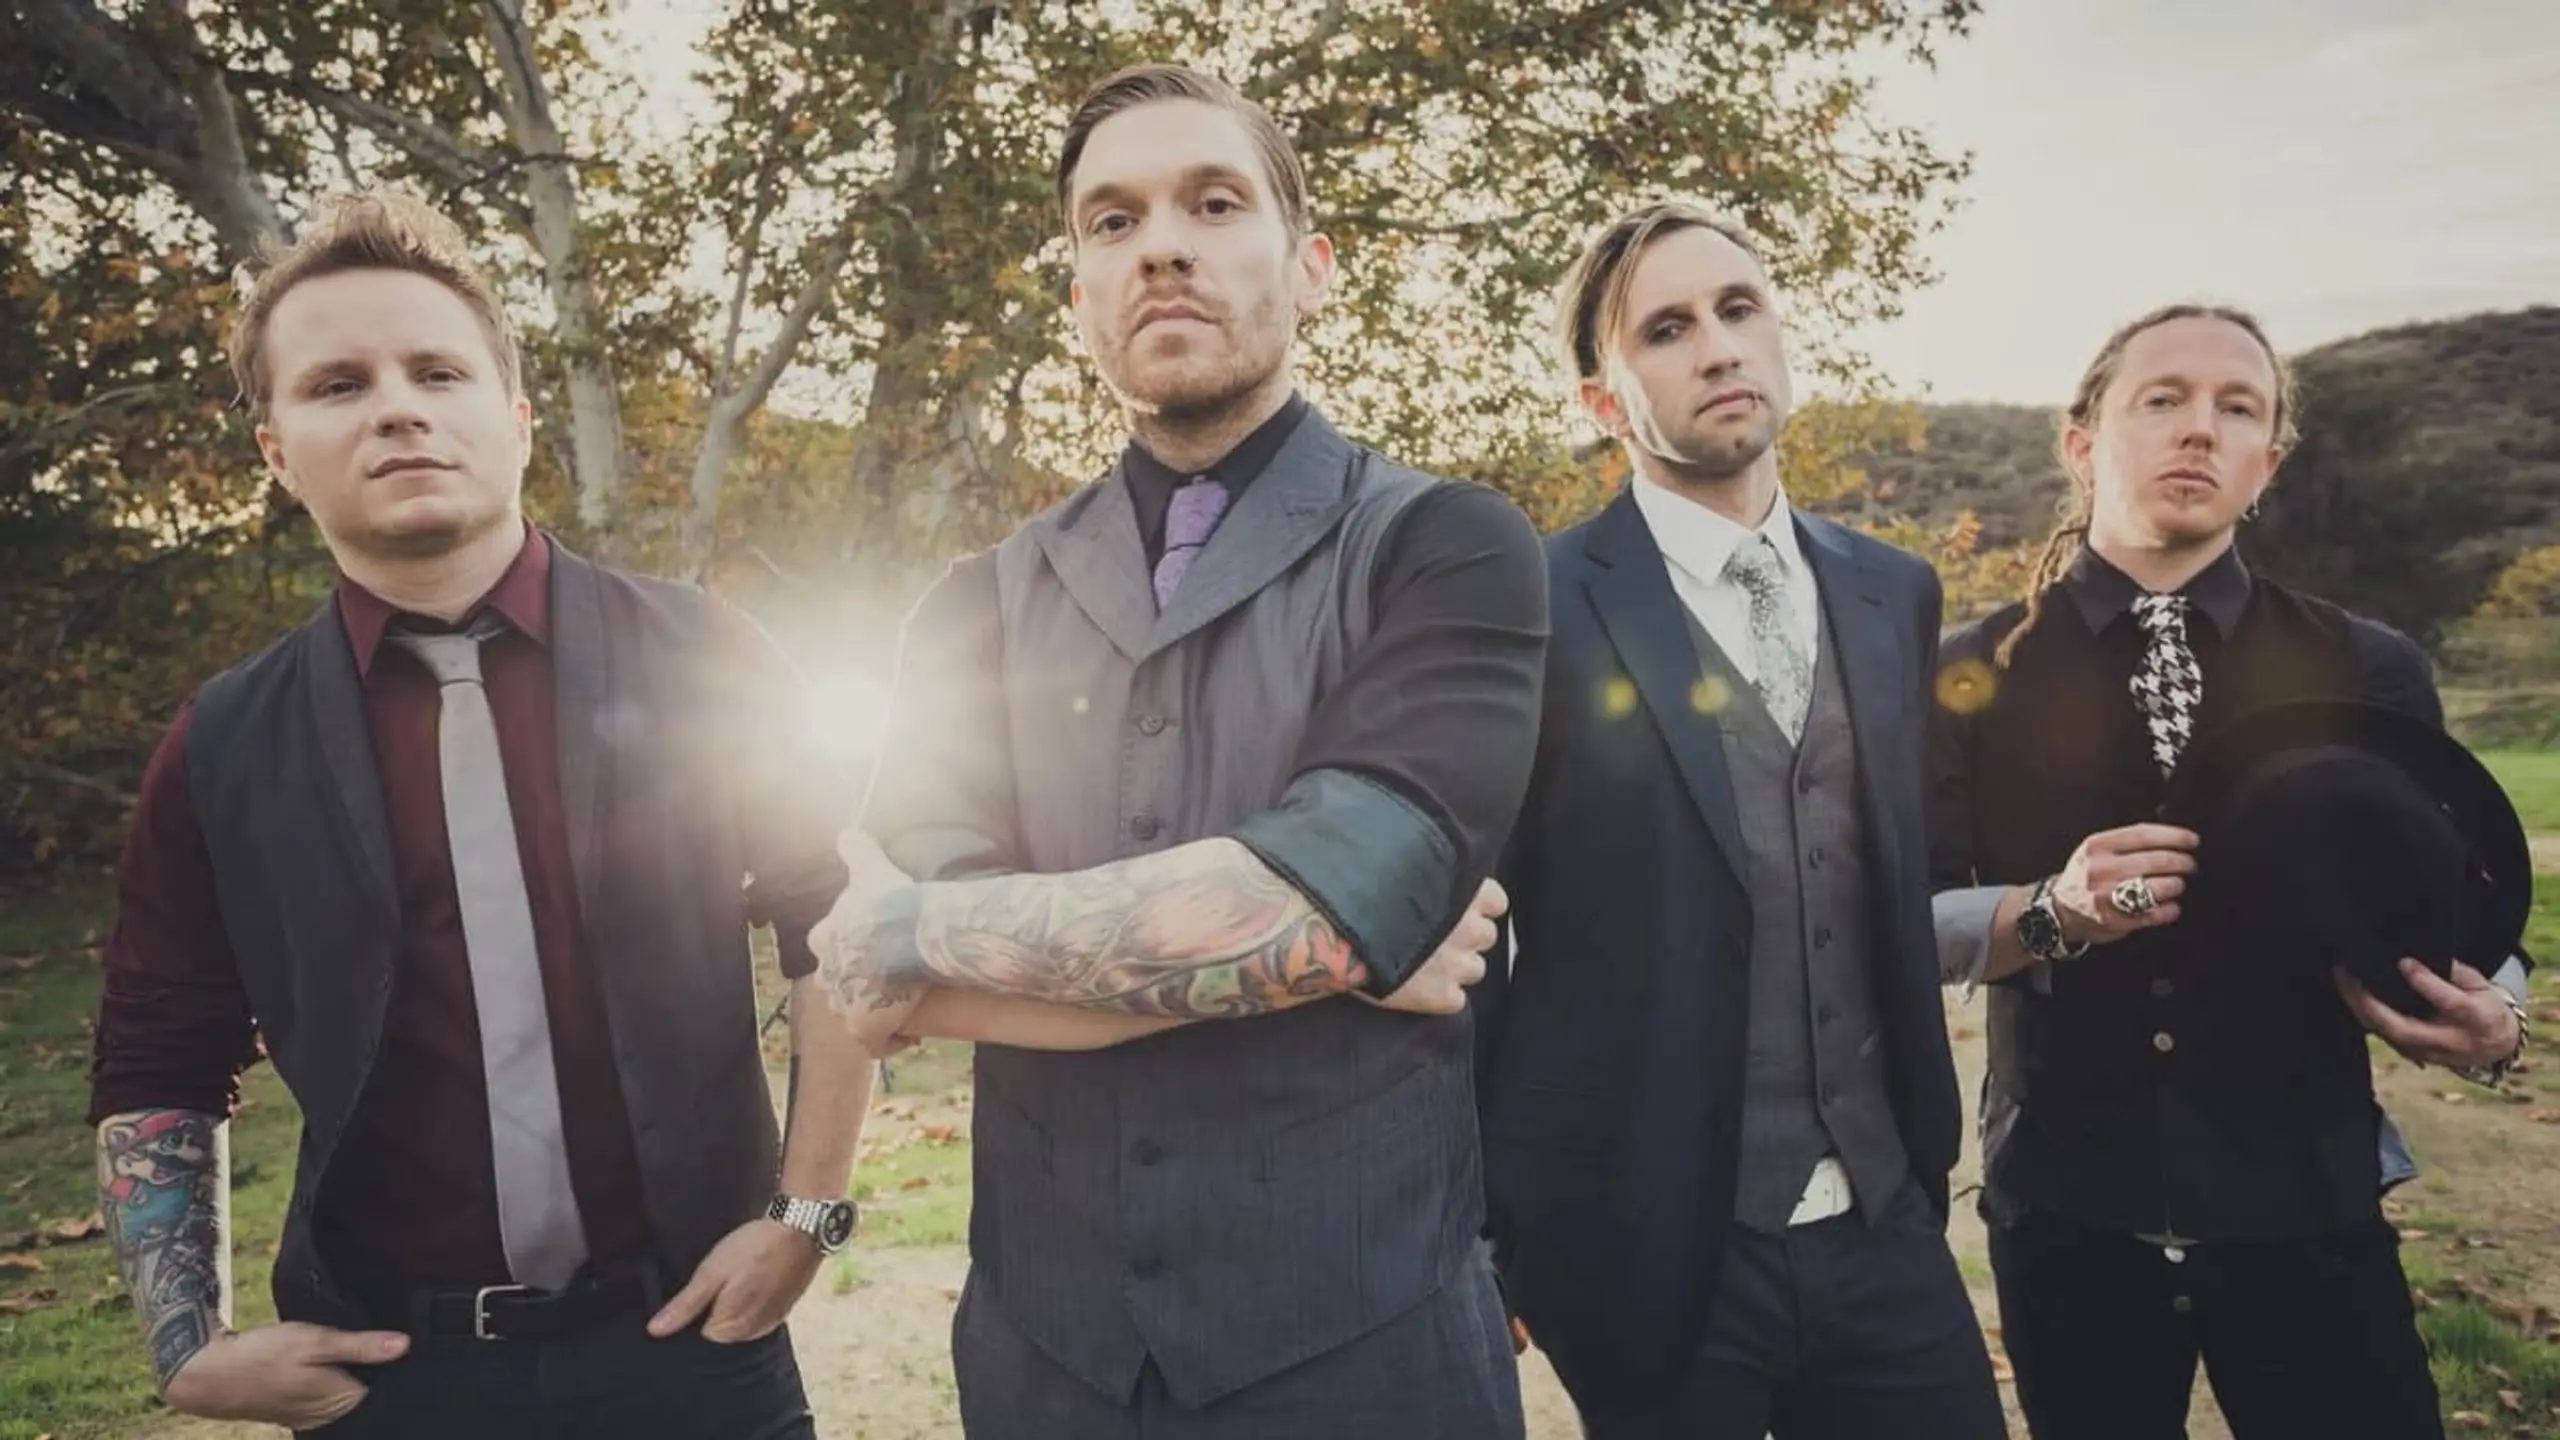 Shinedown: Somewhere in the Stratosphere